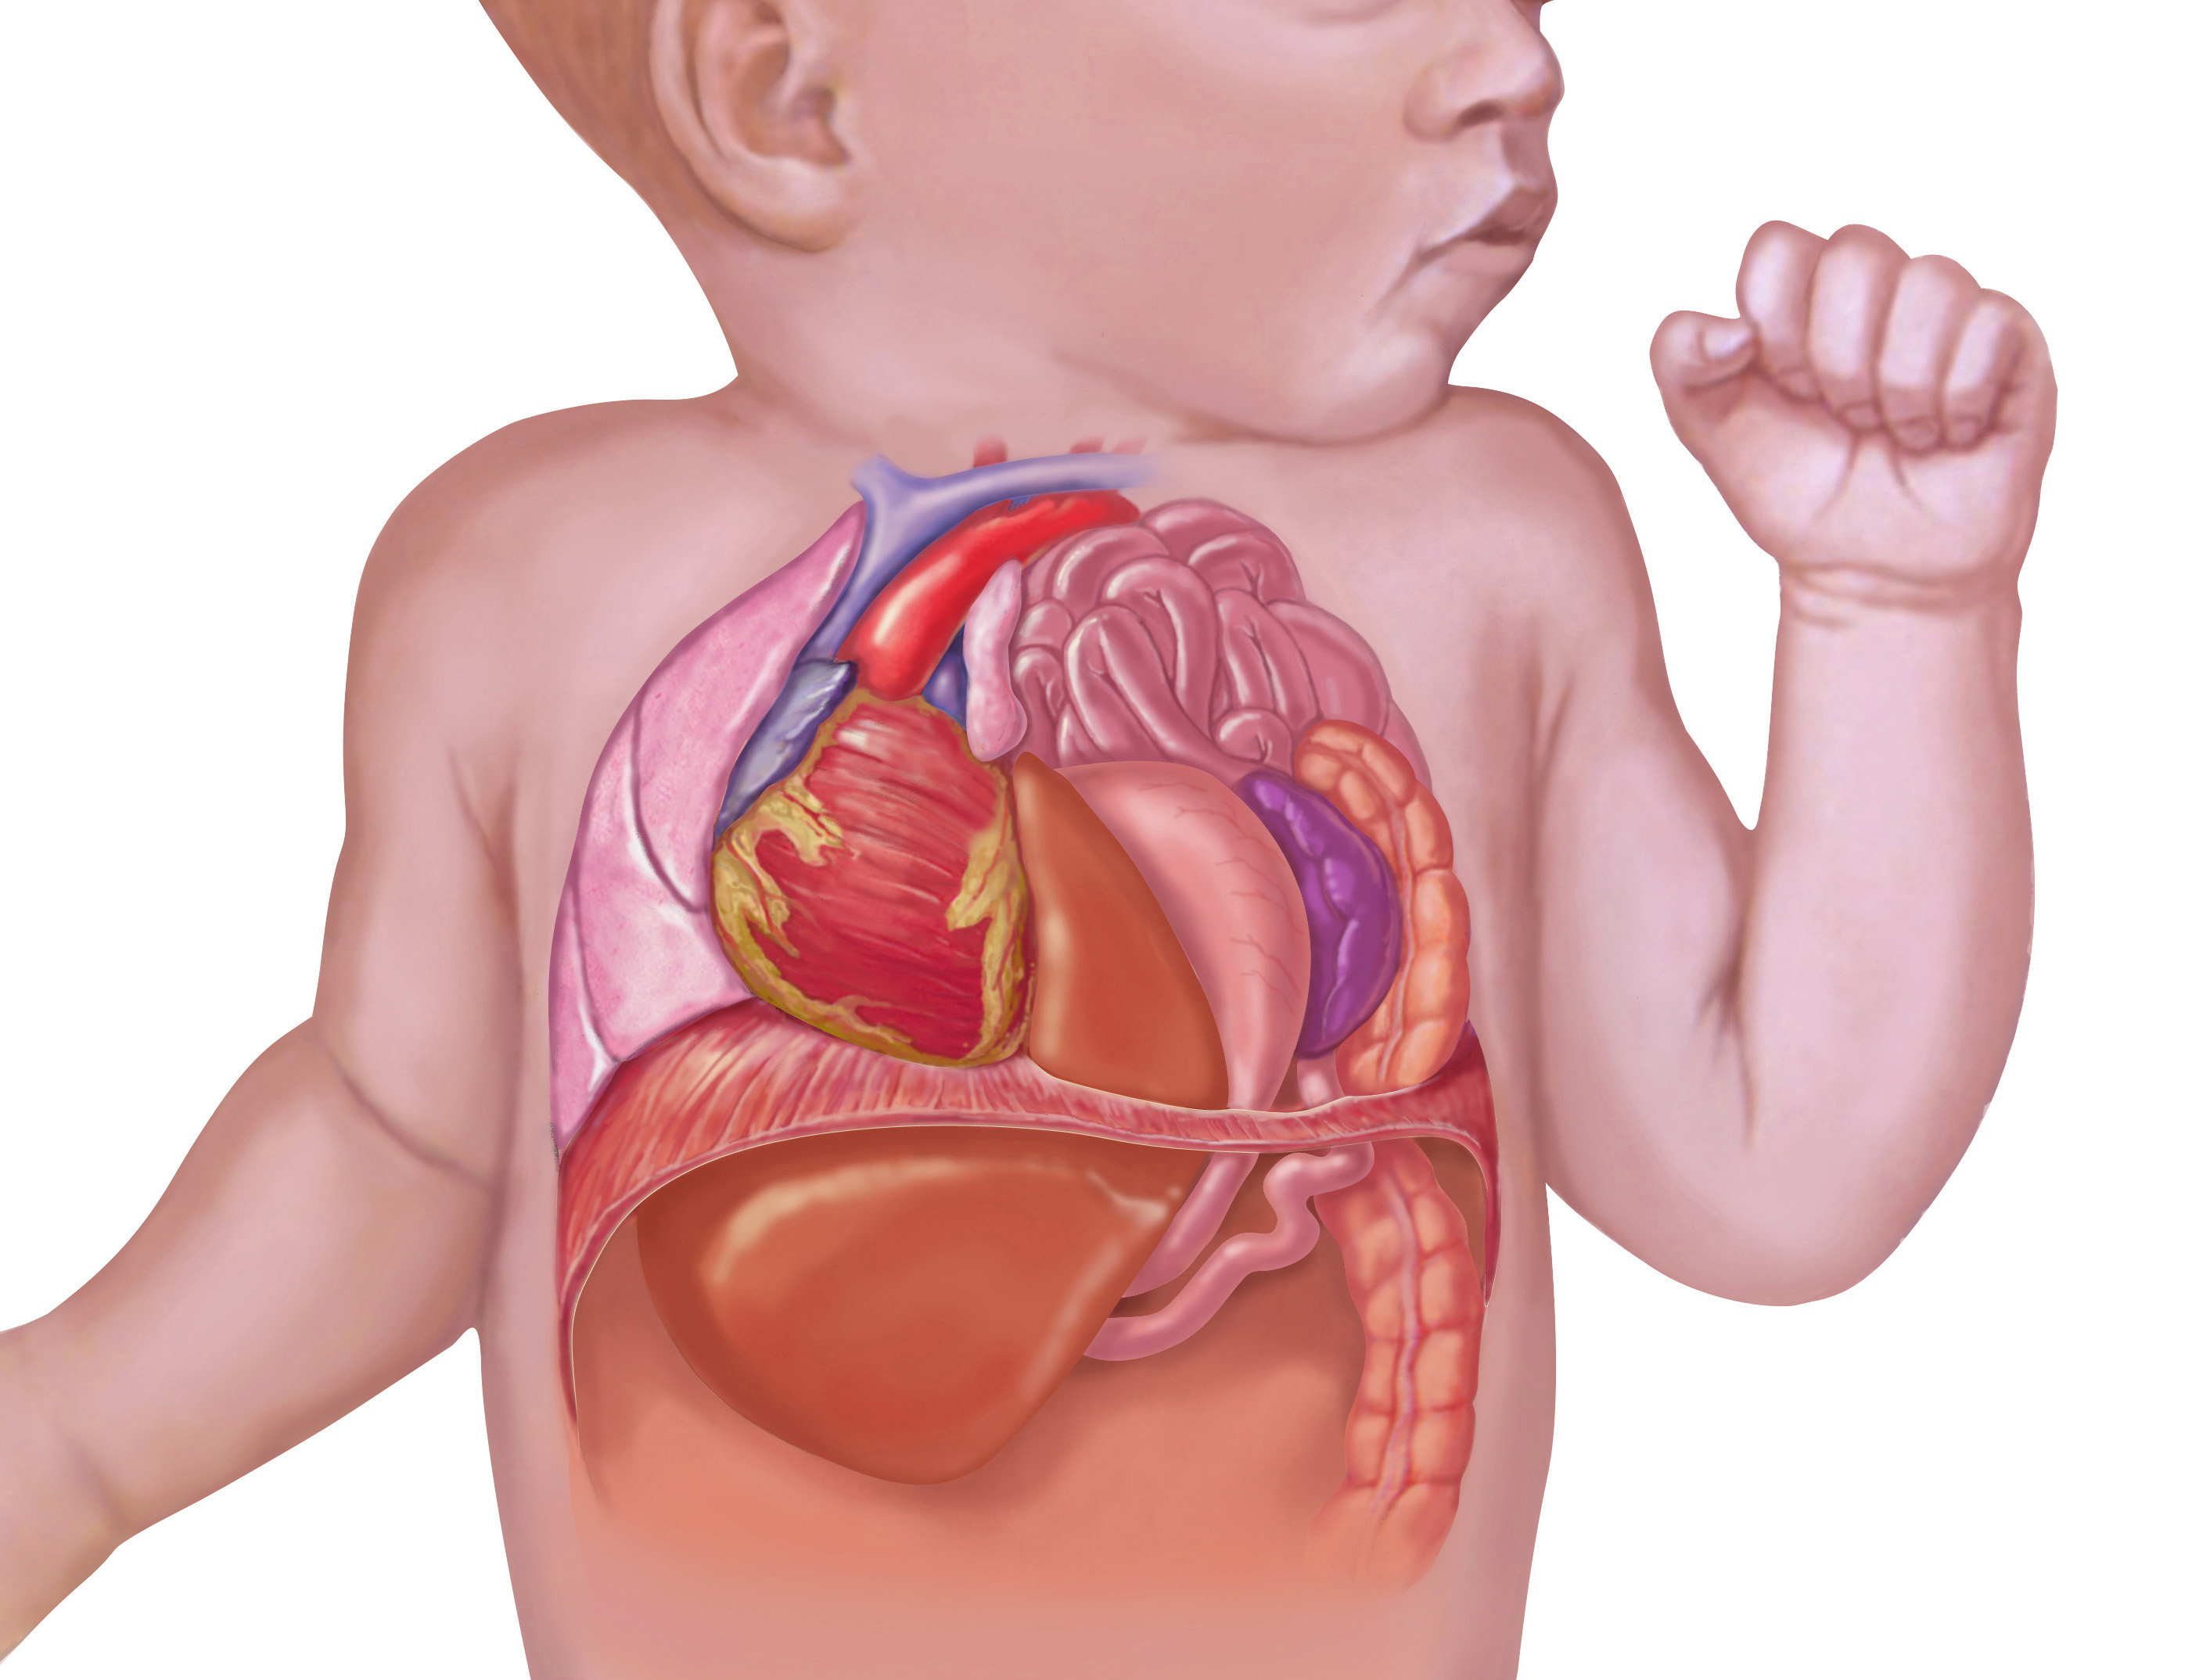 An illustration showing CDH in a baby